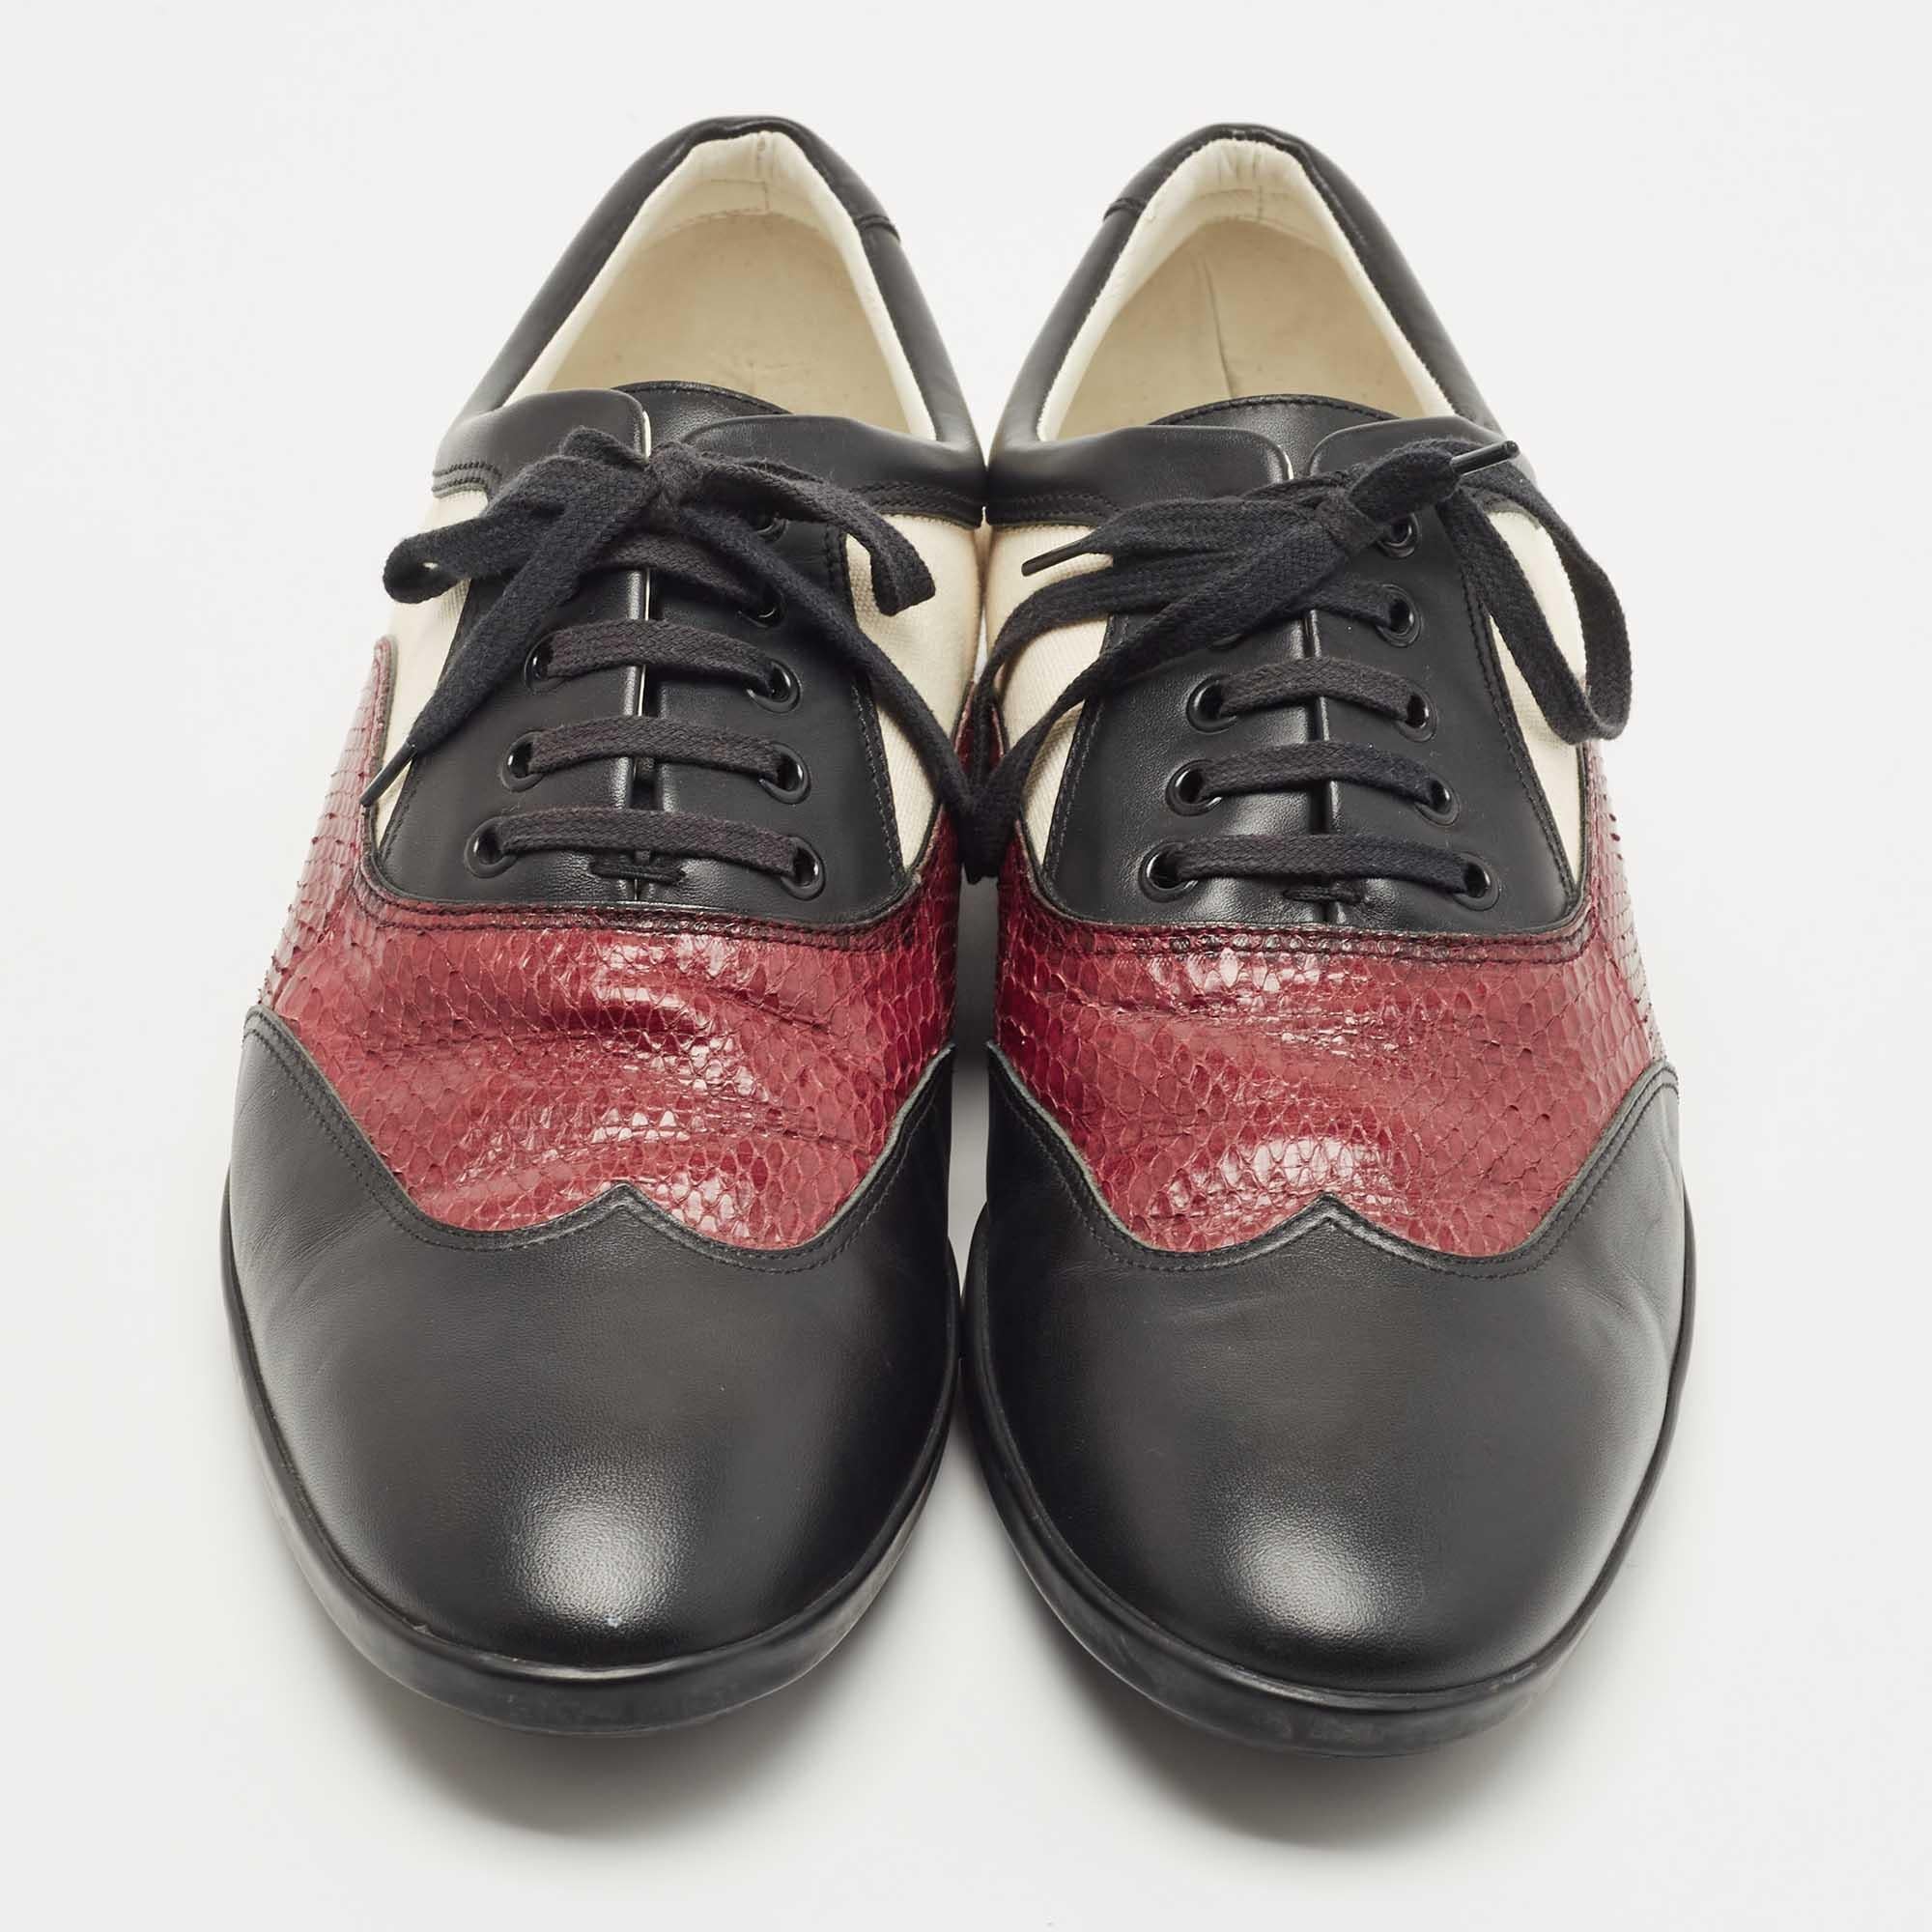 Let this comfortable pair be your first choice when you're out for a long day. These Gucci Oxford sneakers have well-sewn uppers beautifully set on durable soles.

